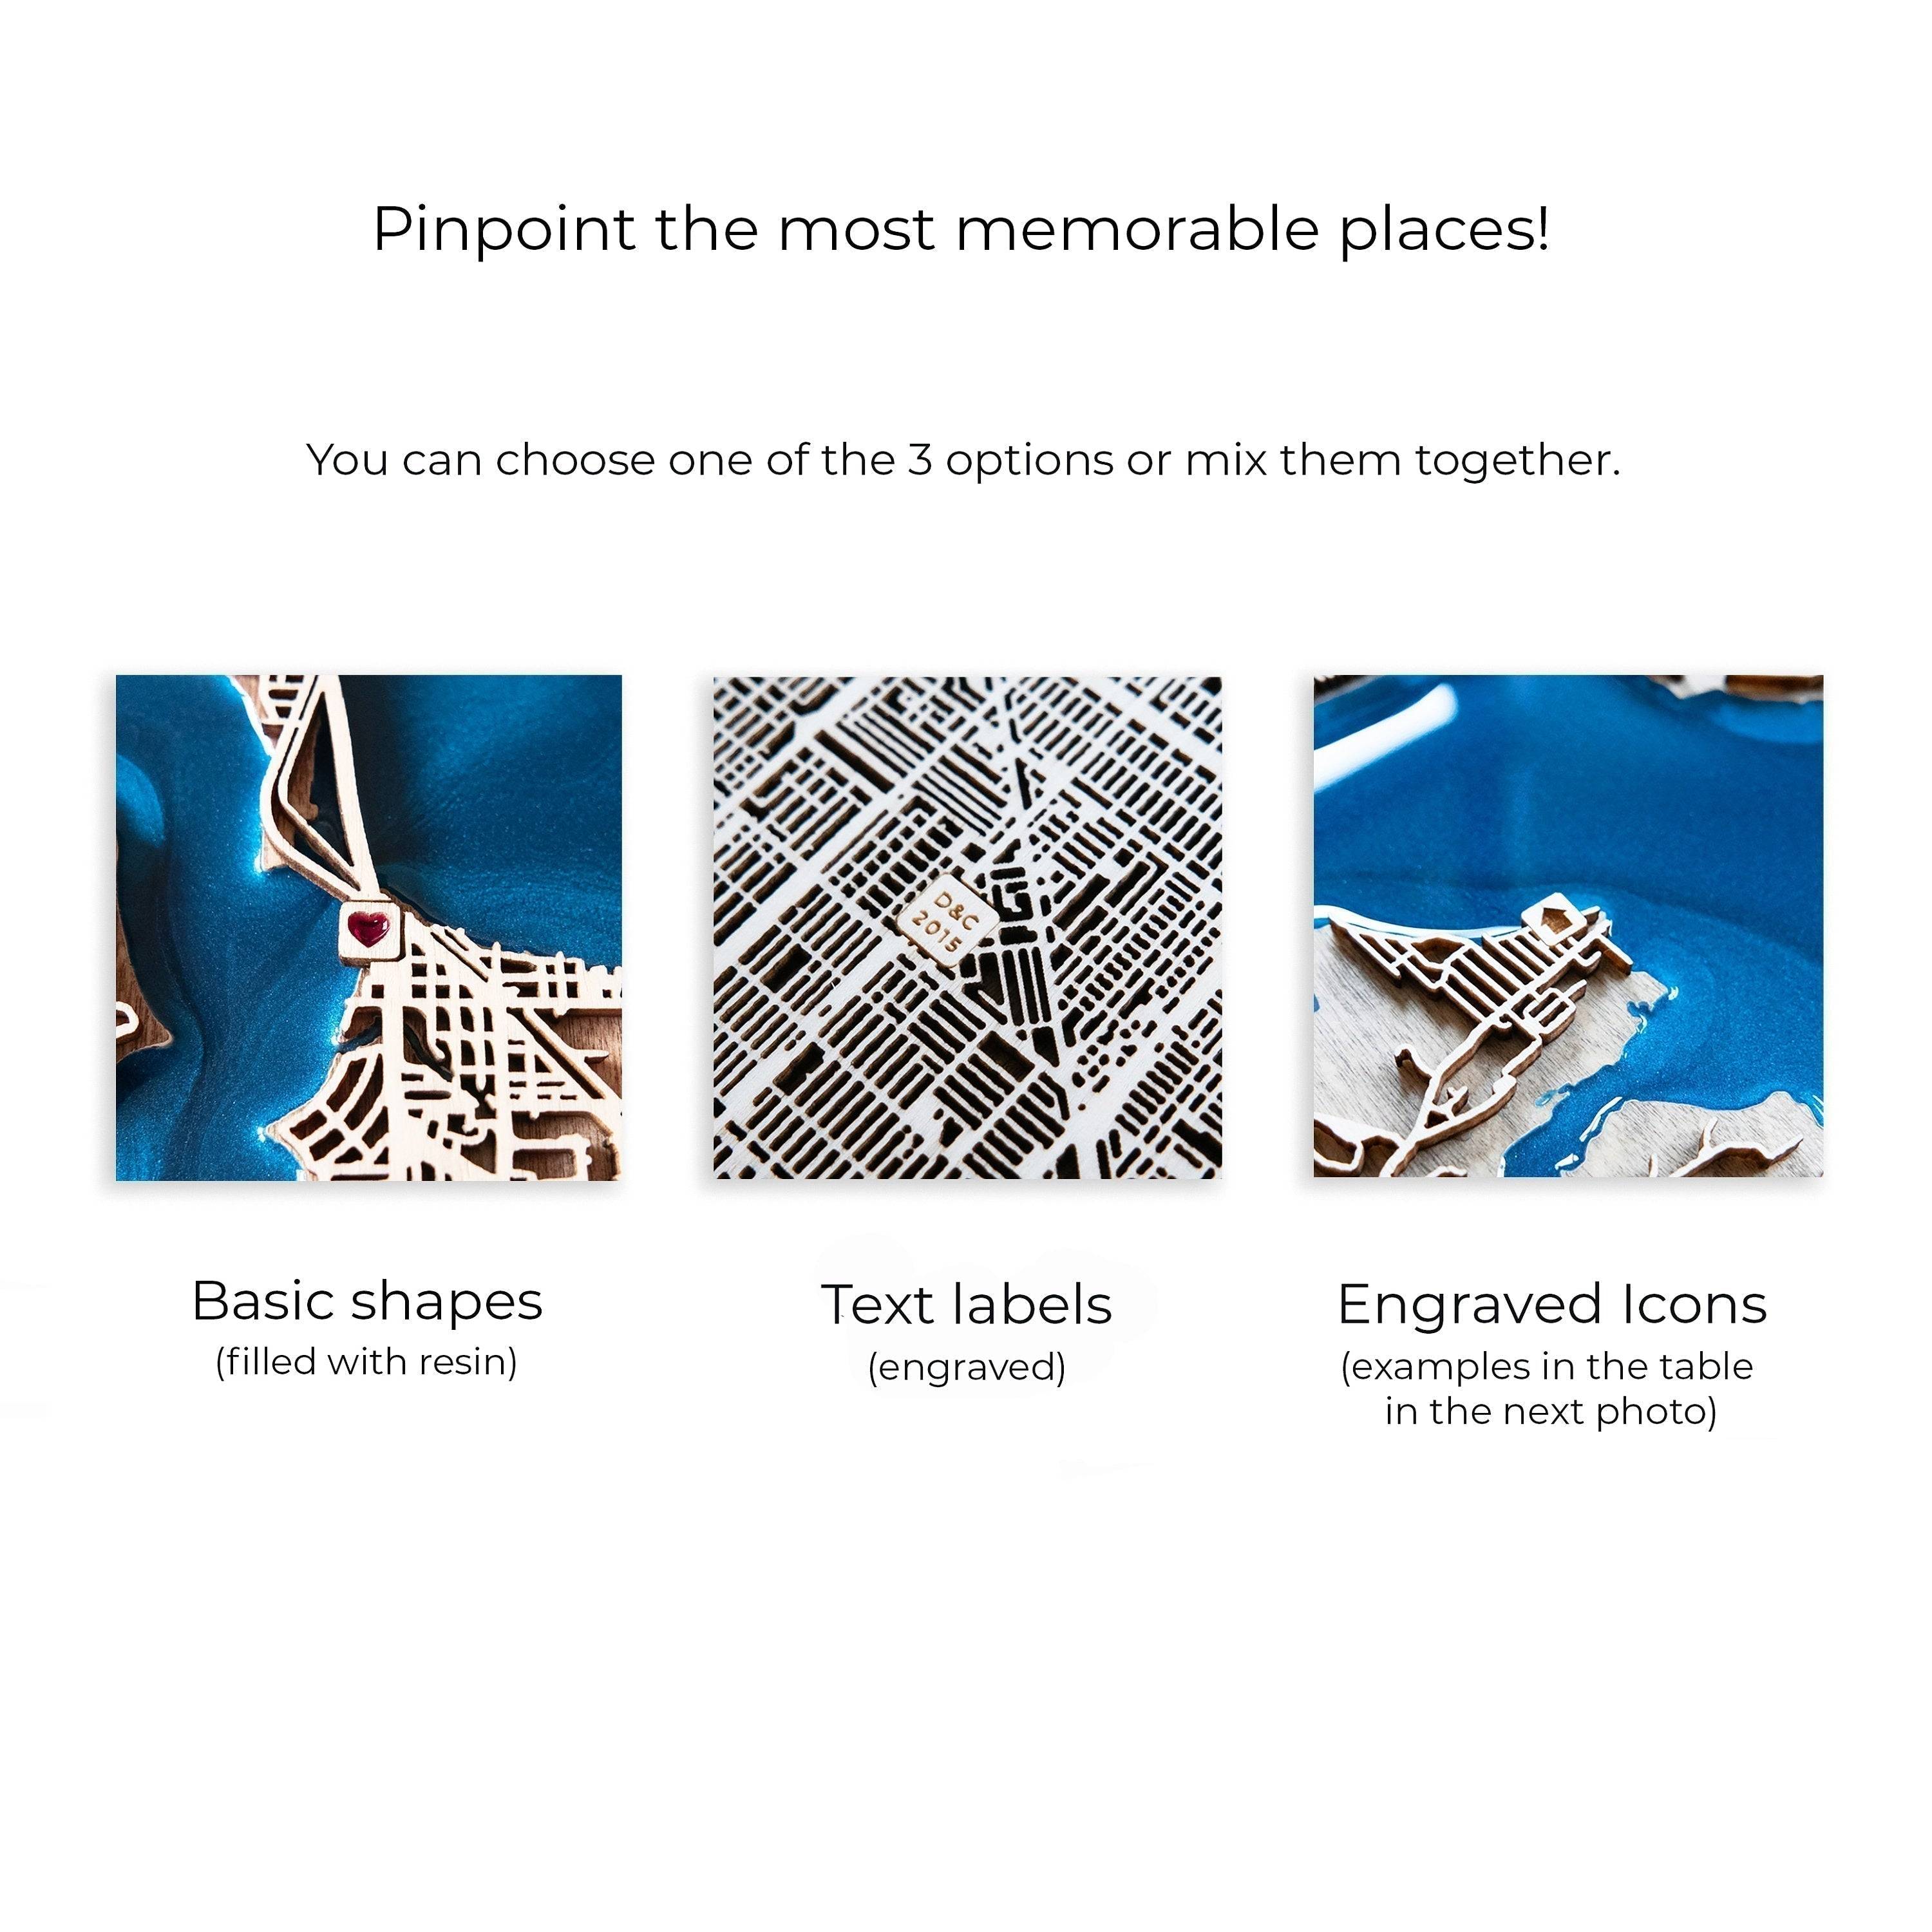 Pinpoint the most memorable places! You can choose basic shapes filled with resin, engraved short text or simple icons.